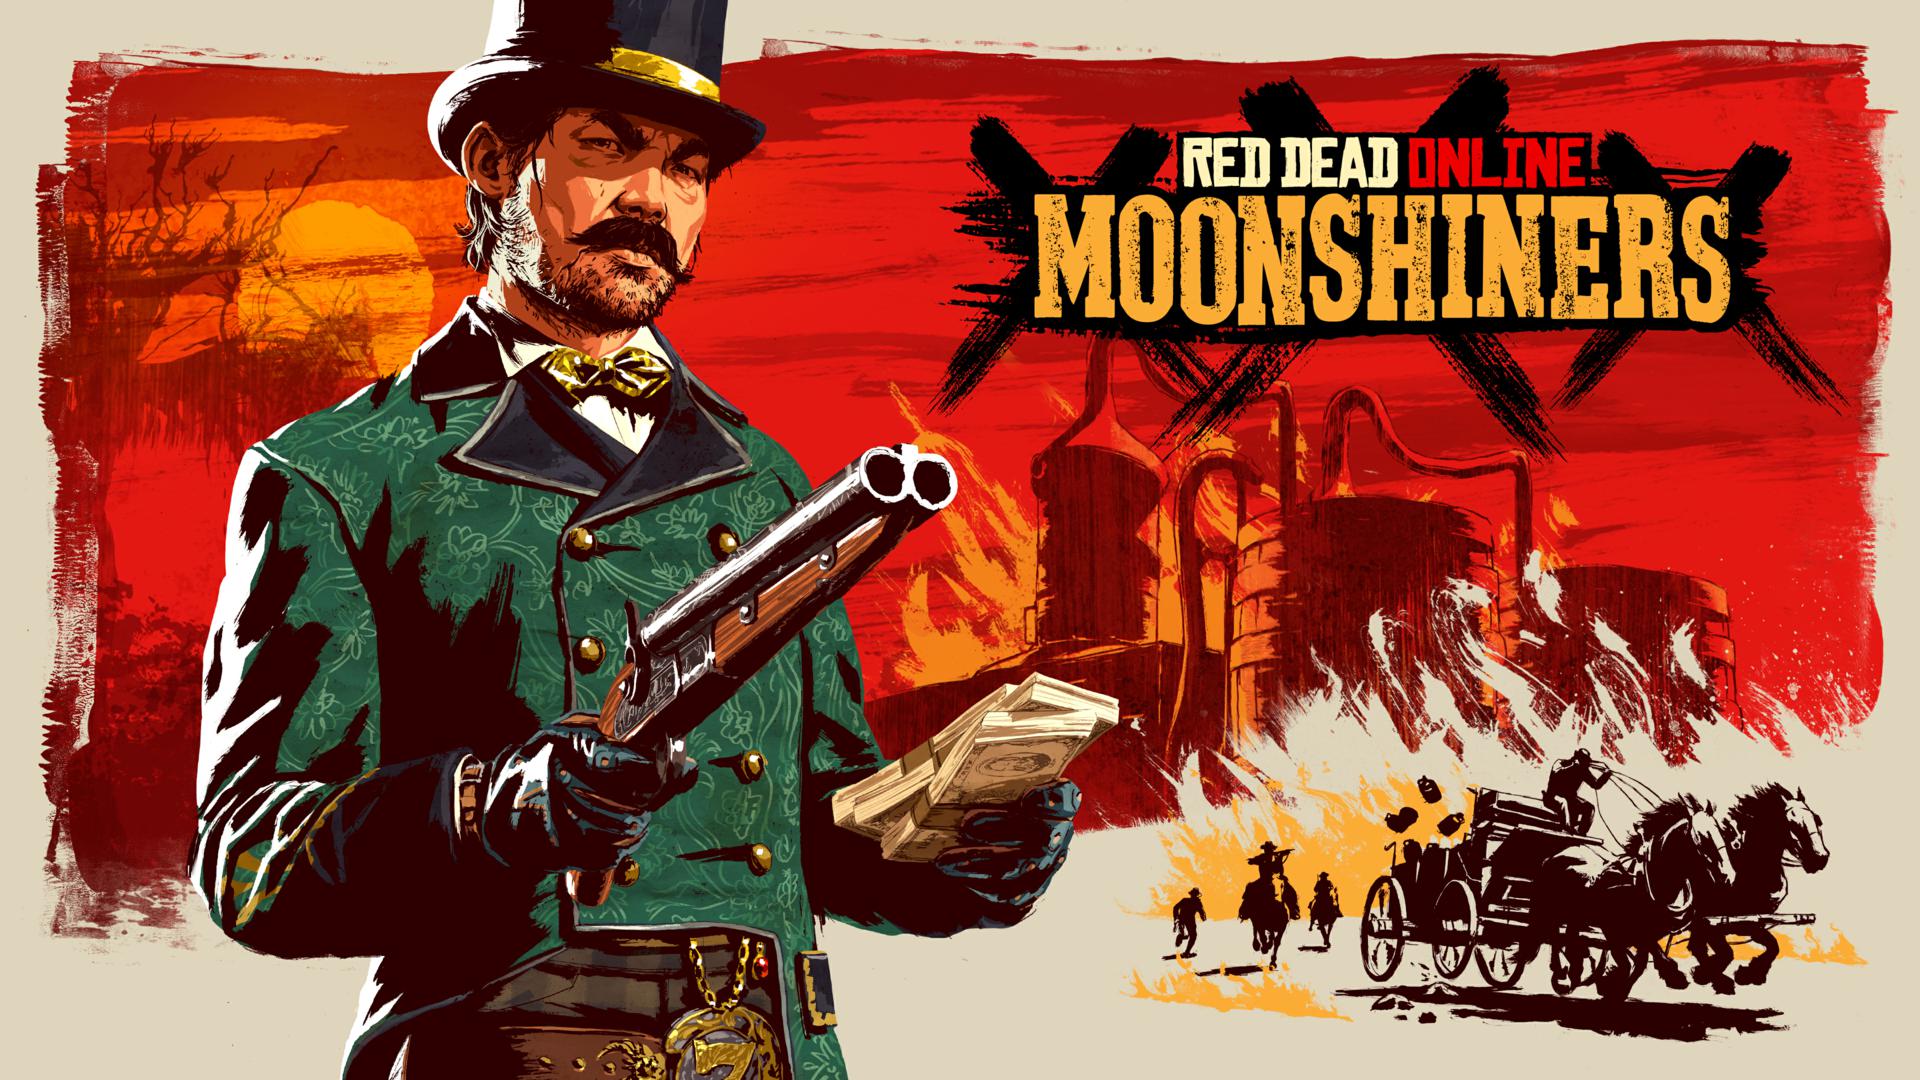 Red dead online moonshiners